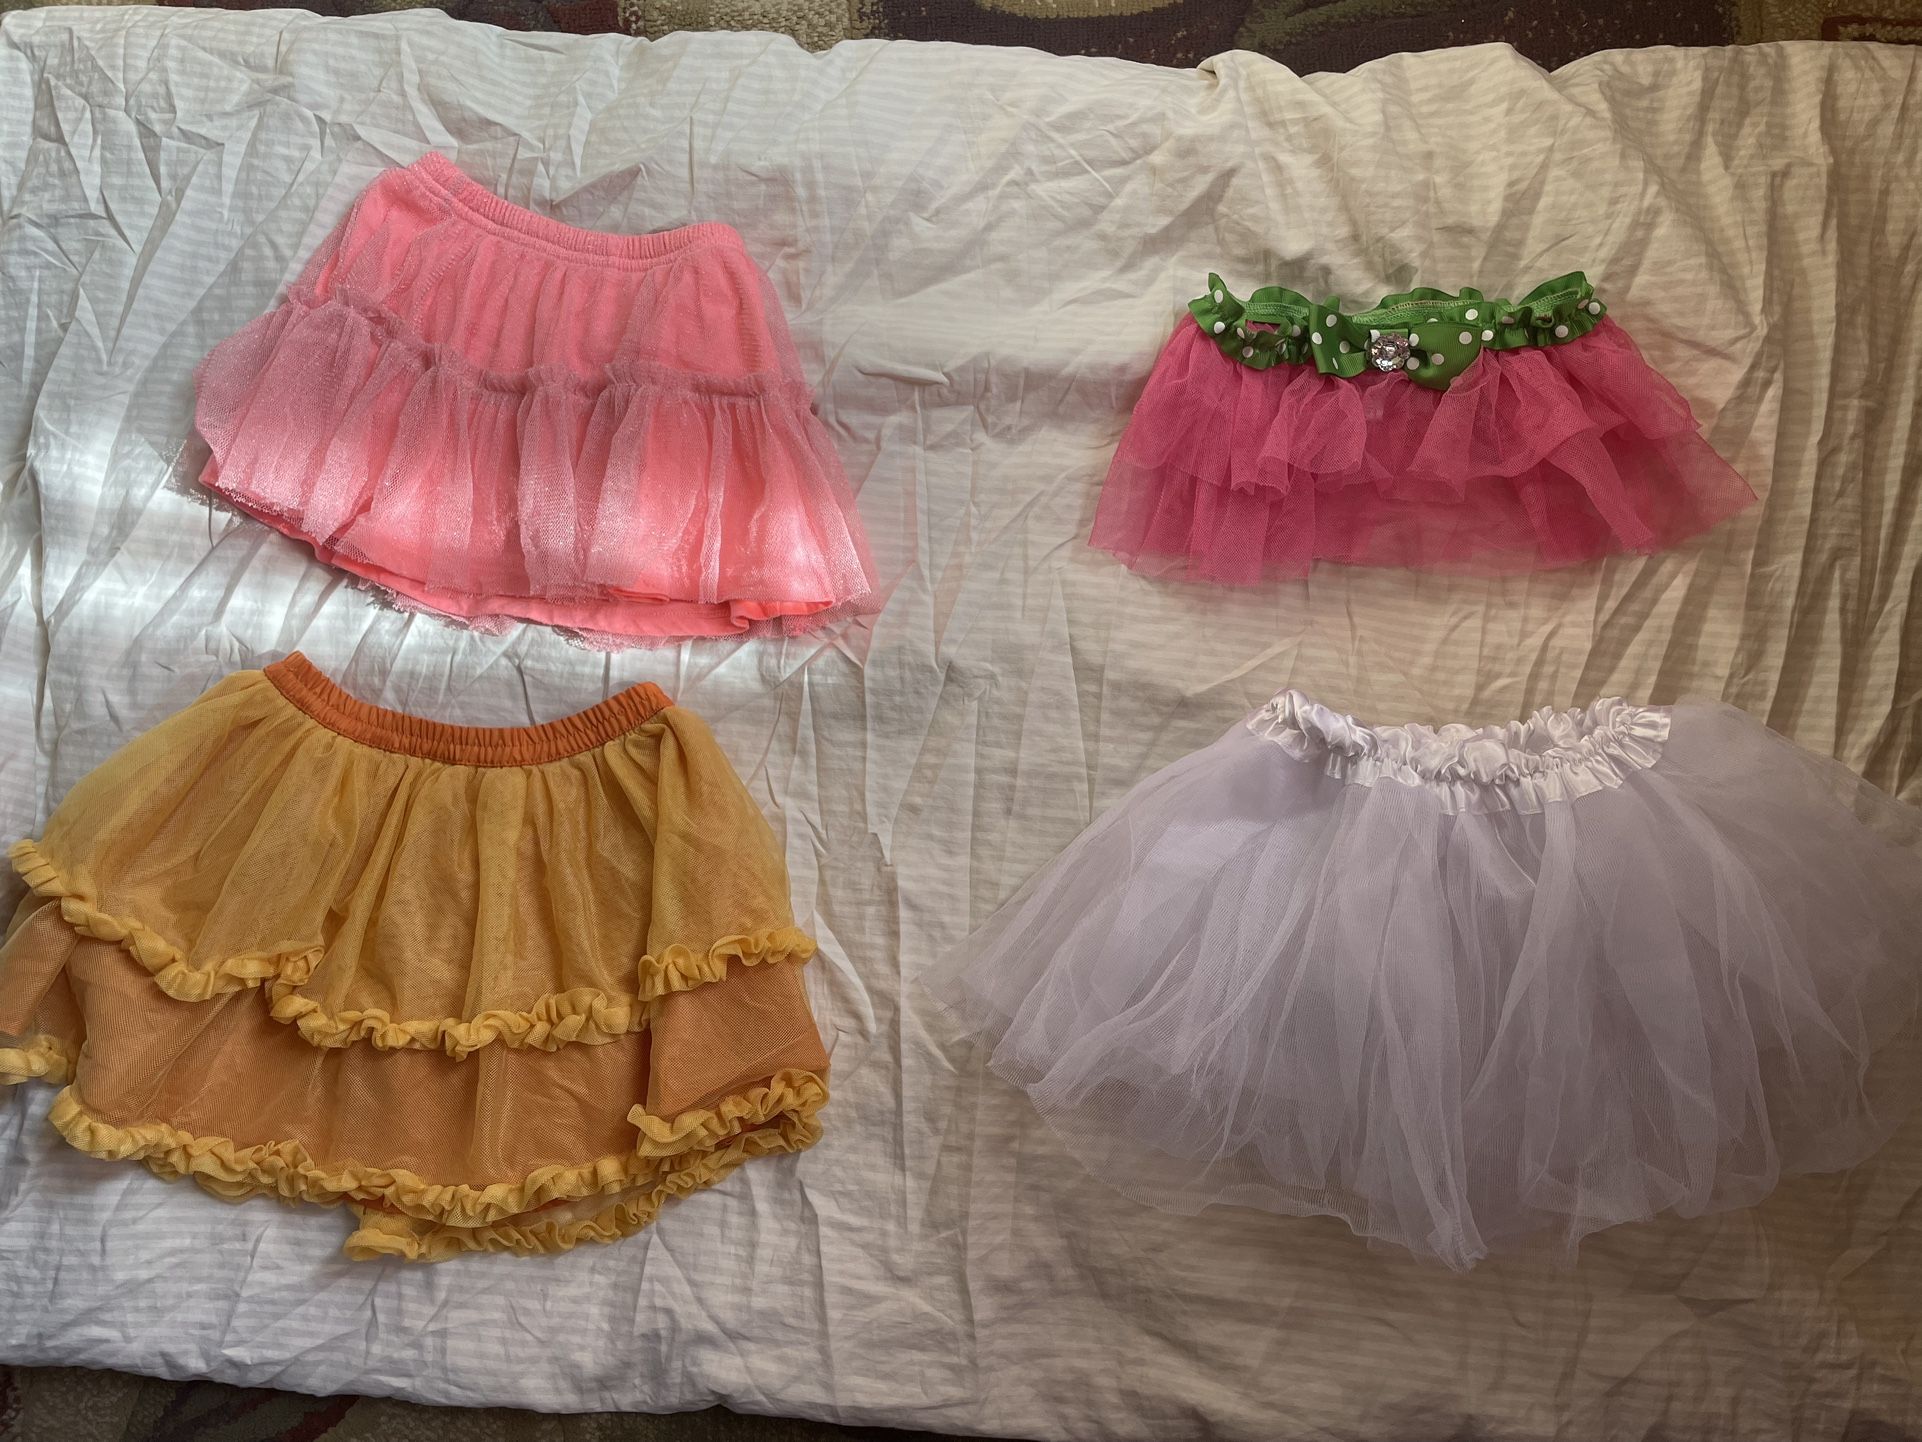 Lot of 5 Girls Tulle Ruffle Fairy Skirts 3T but waistband is elastic